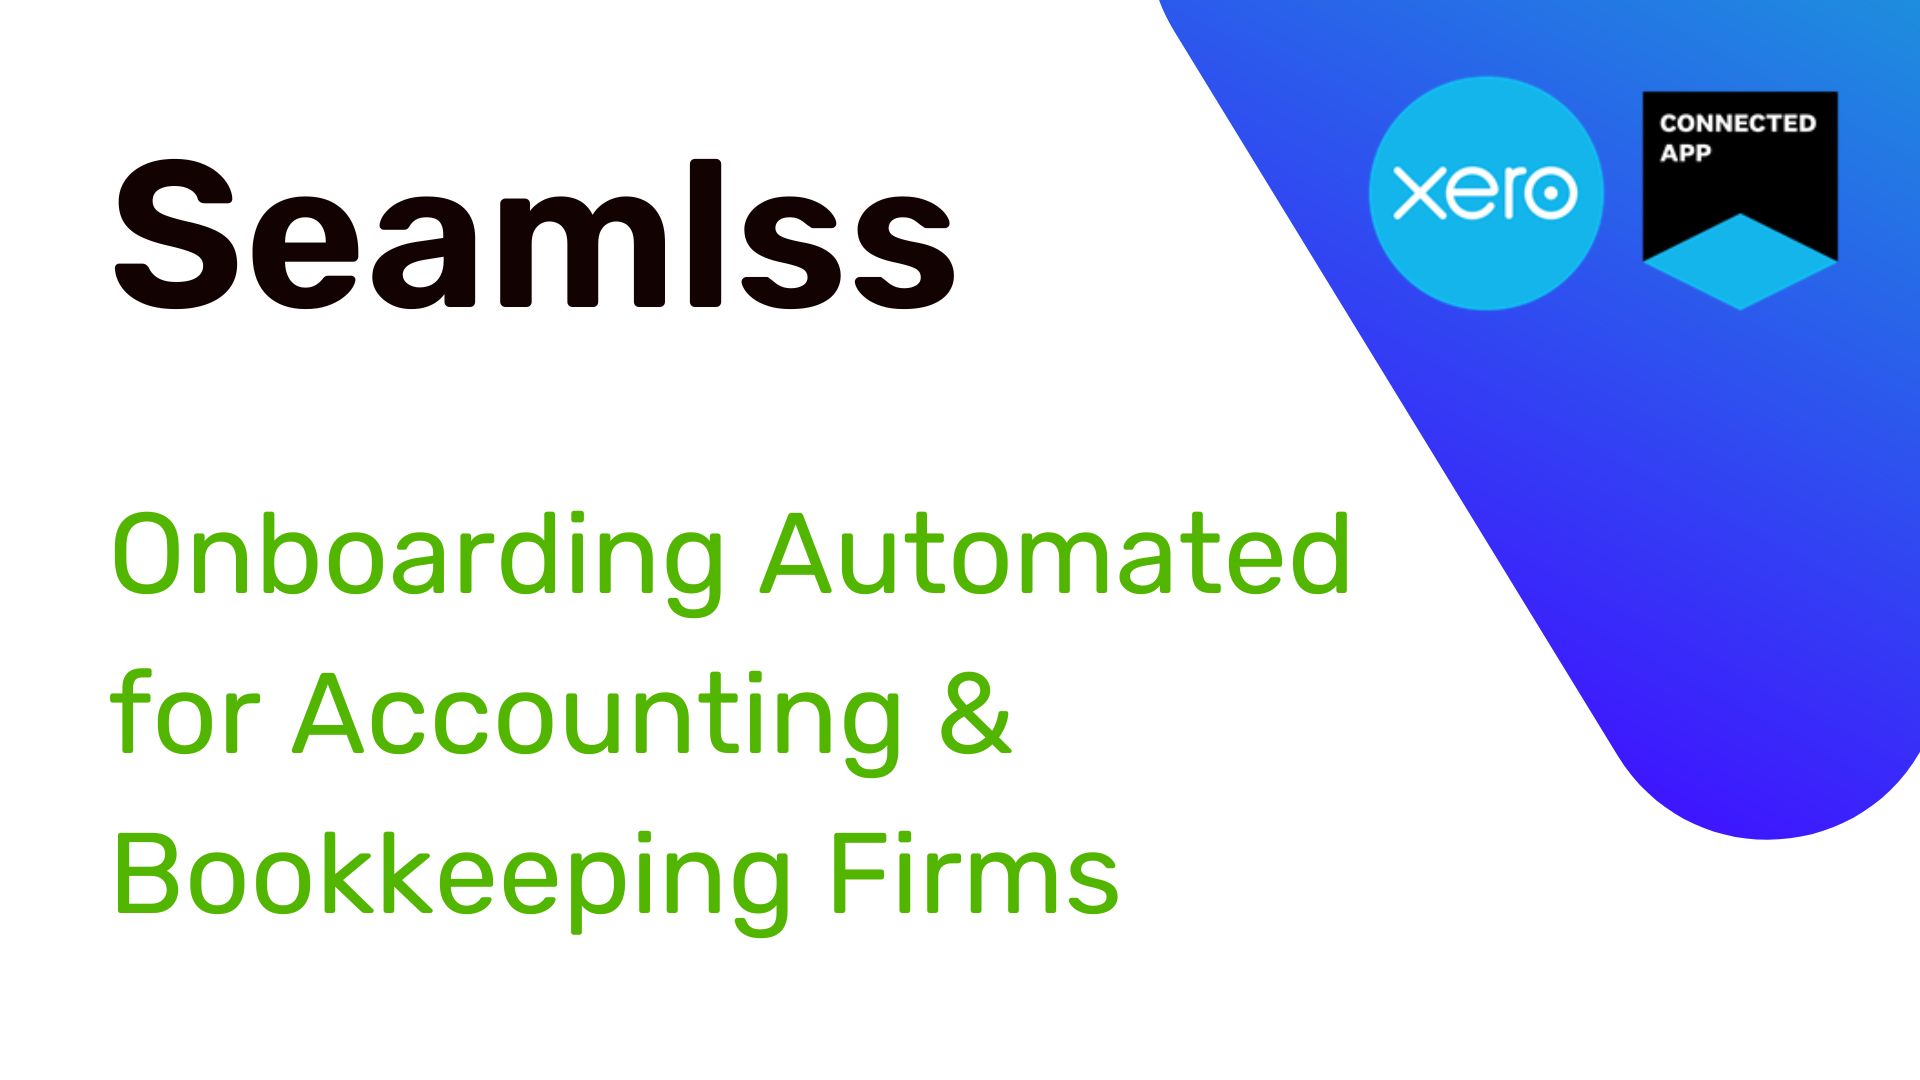 Automate your onboarding of clients with Seamlss